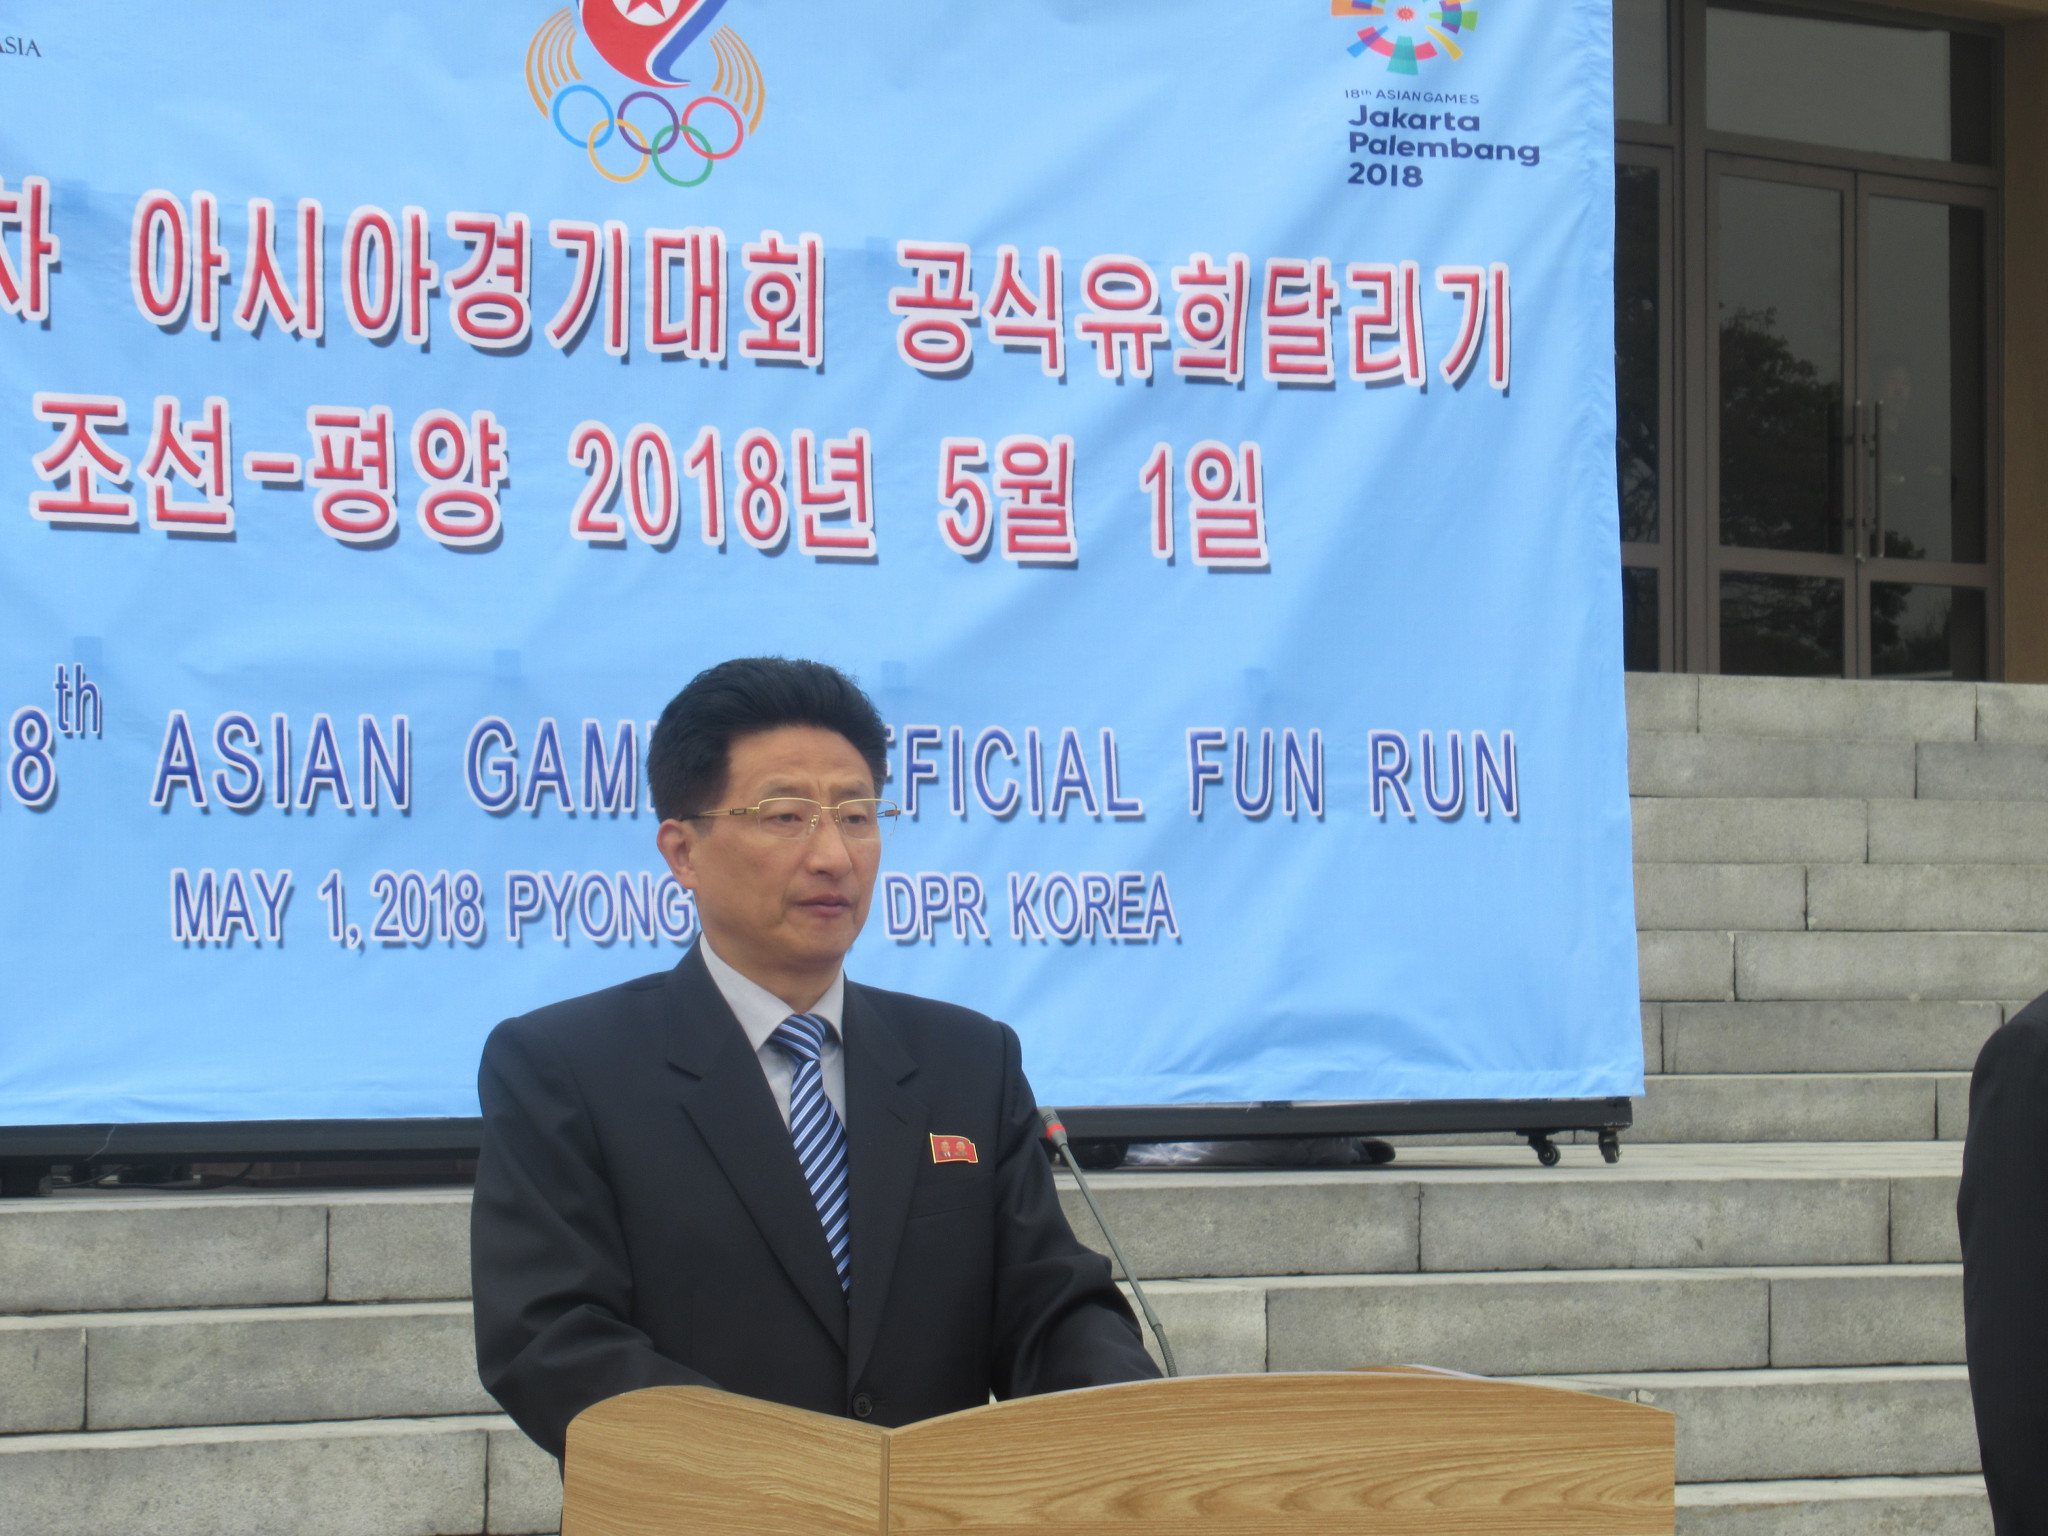 North and South Korea to meet again for discussions on joint teams at 2018 Asian Games